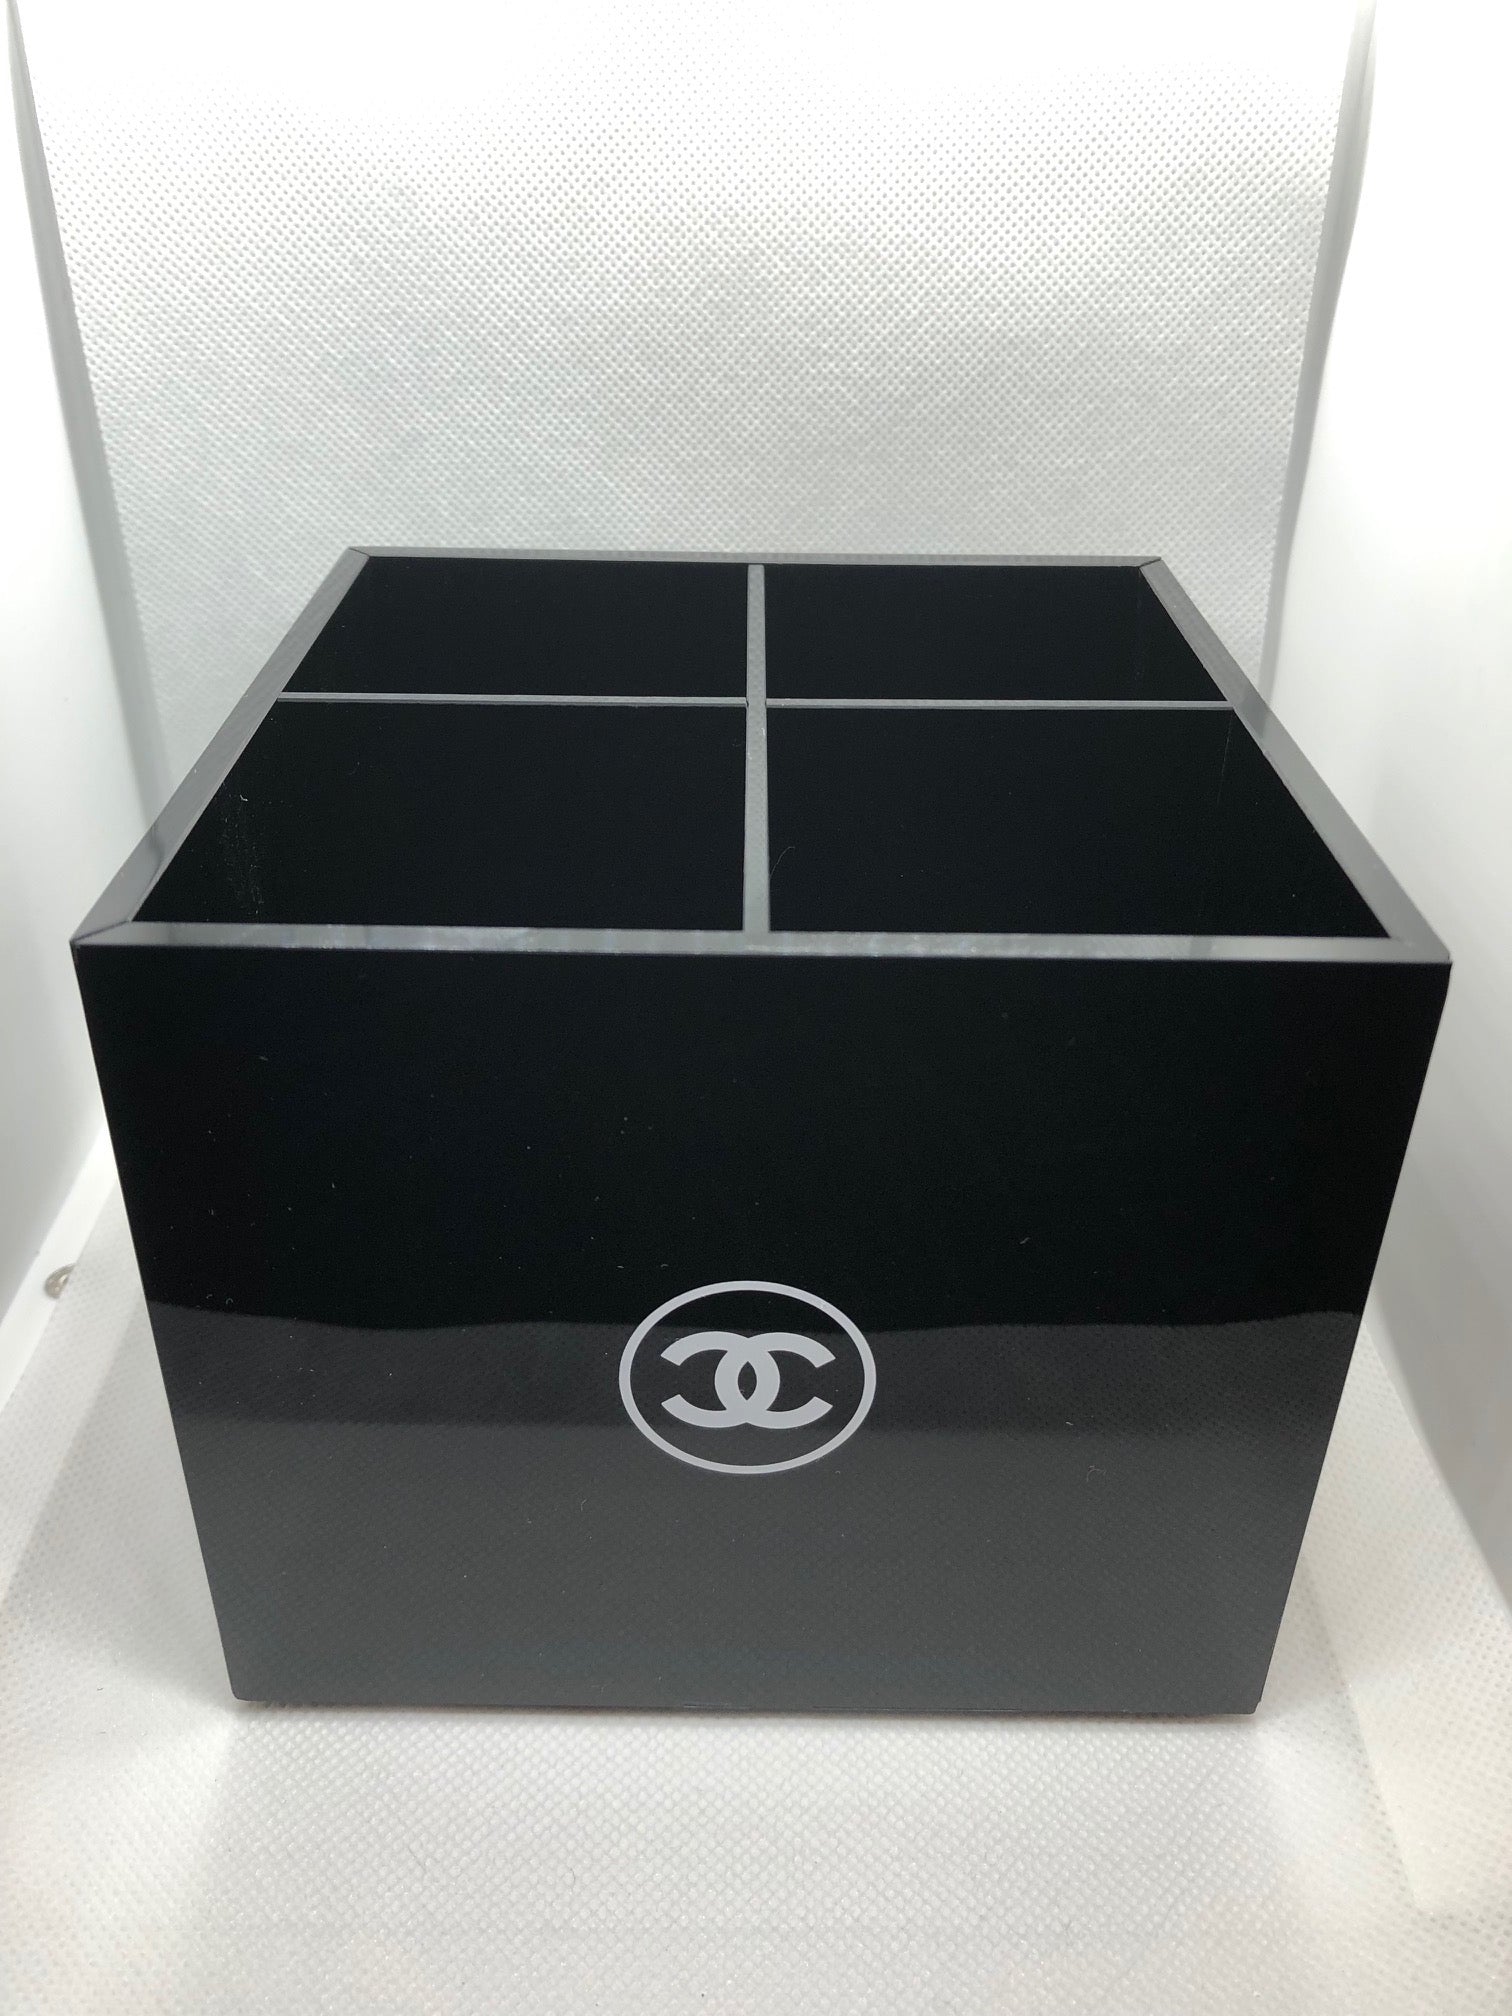 Chanel VIP Classic gift item Black White Cosmetic Makeup Jewelry  Case/Box/Tray /Organizer